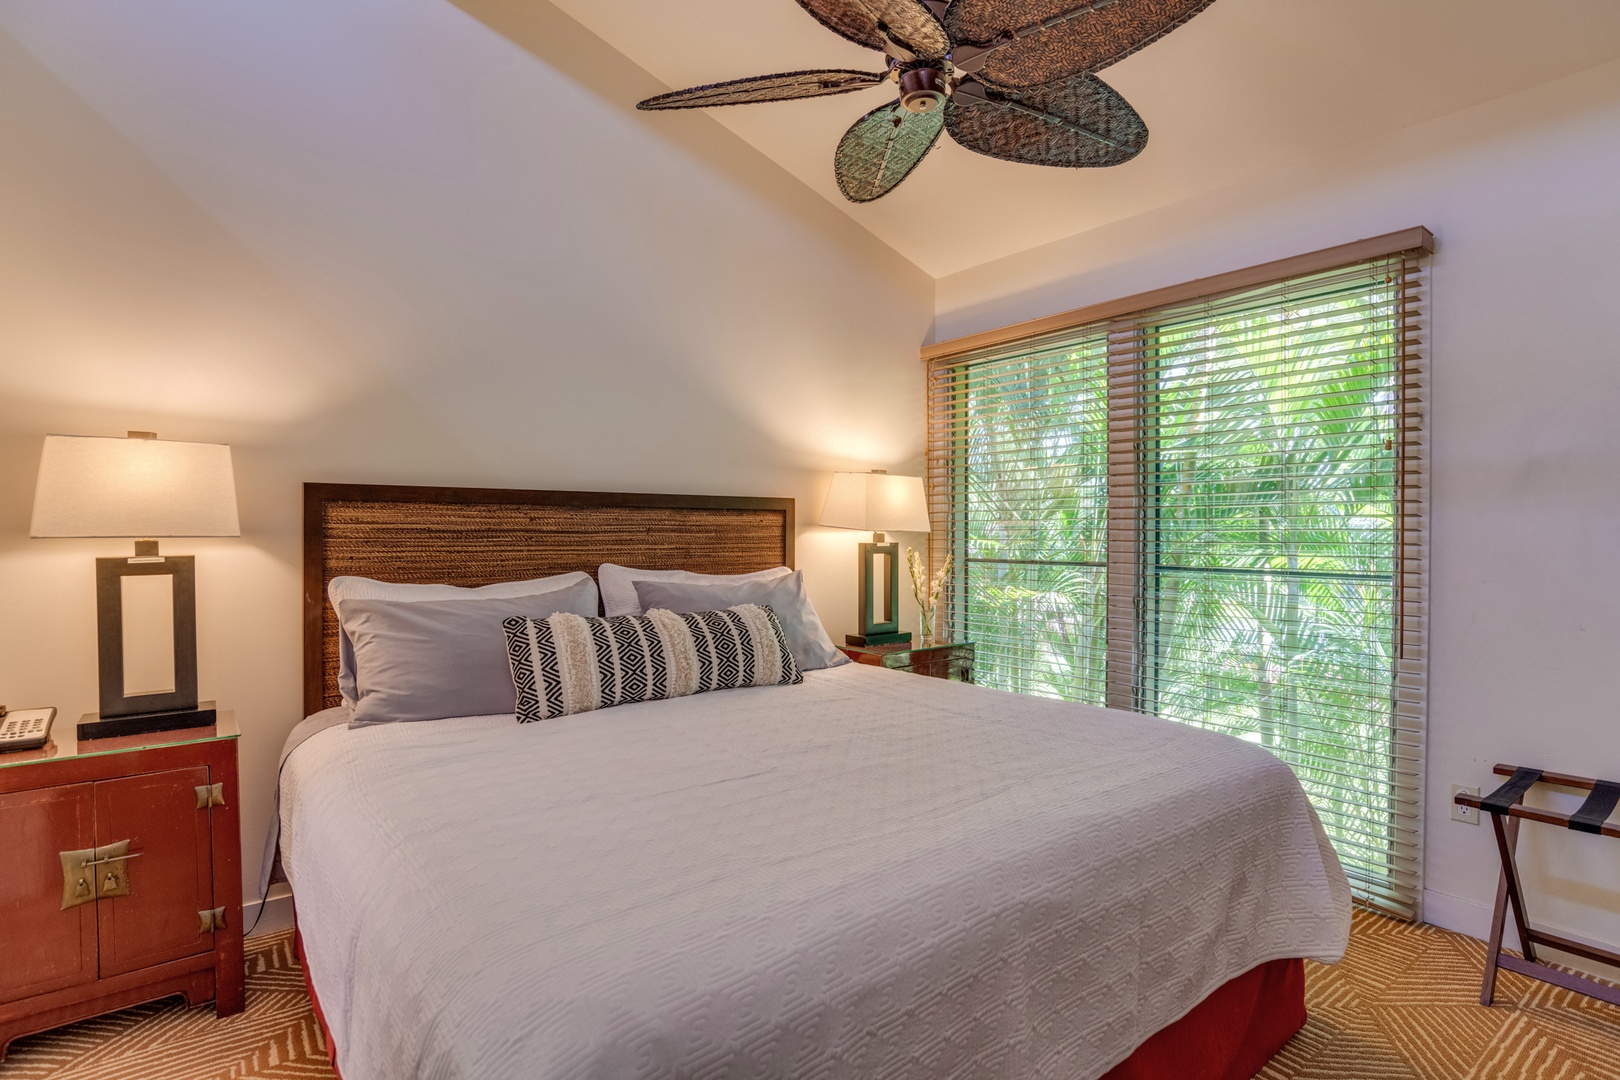 Lahaina Vacation Rentals, Aina Nalu D-207 - each of the lovely bedrooms has its own en suite bathroom